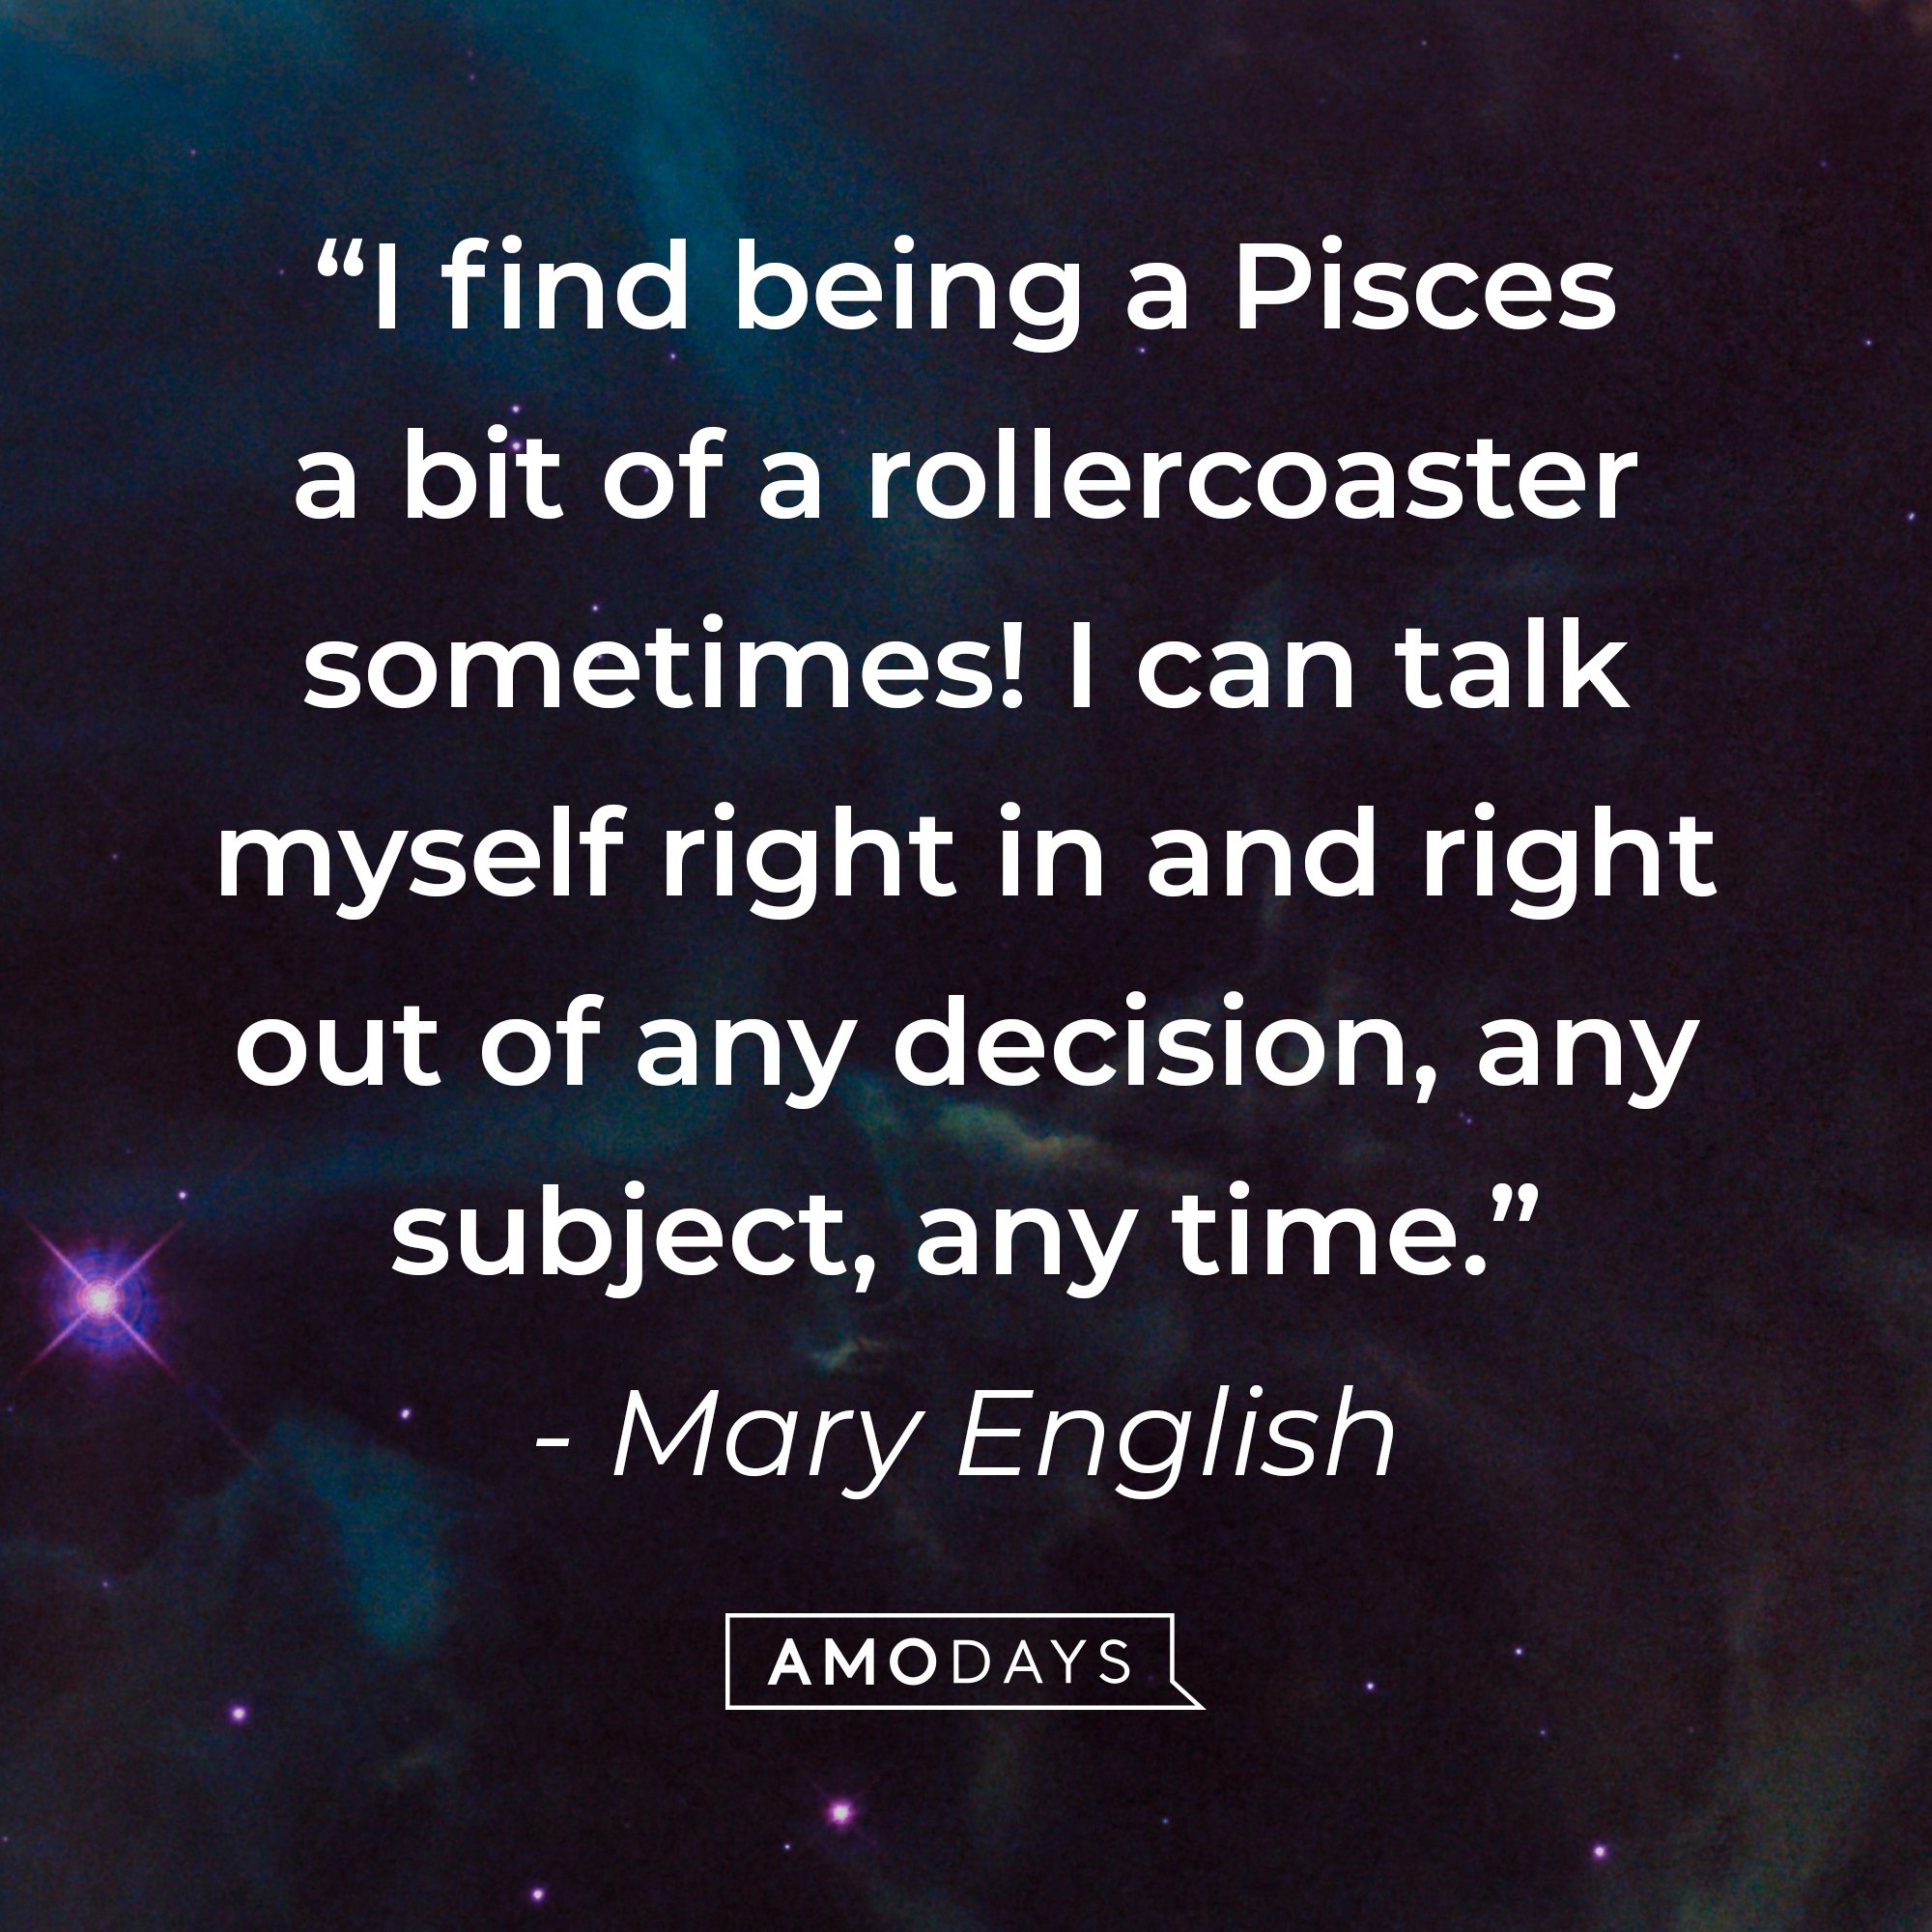 Mary English's quote: "I find being a Pisces a bit of a rollercoaster sometimes! I can talk myself right in and right out of any decision, any subject, any time." | Image: AmoDays